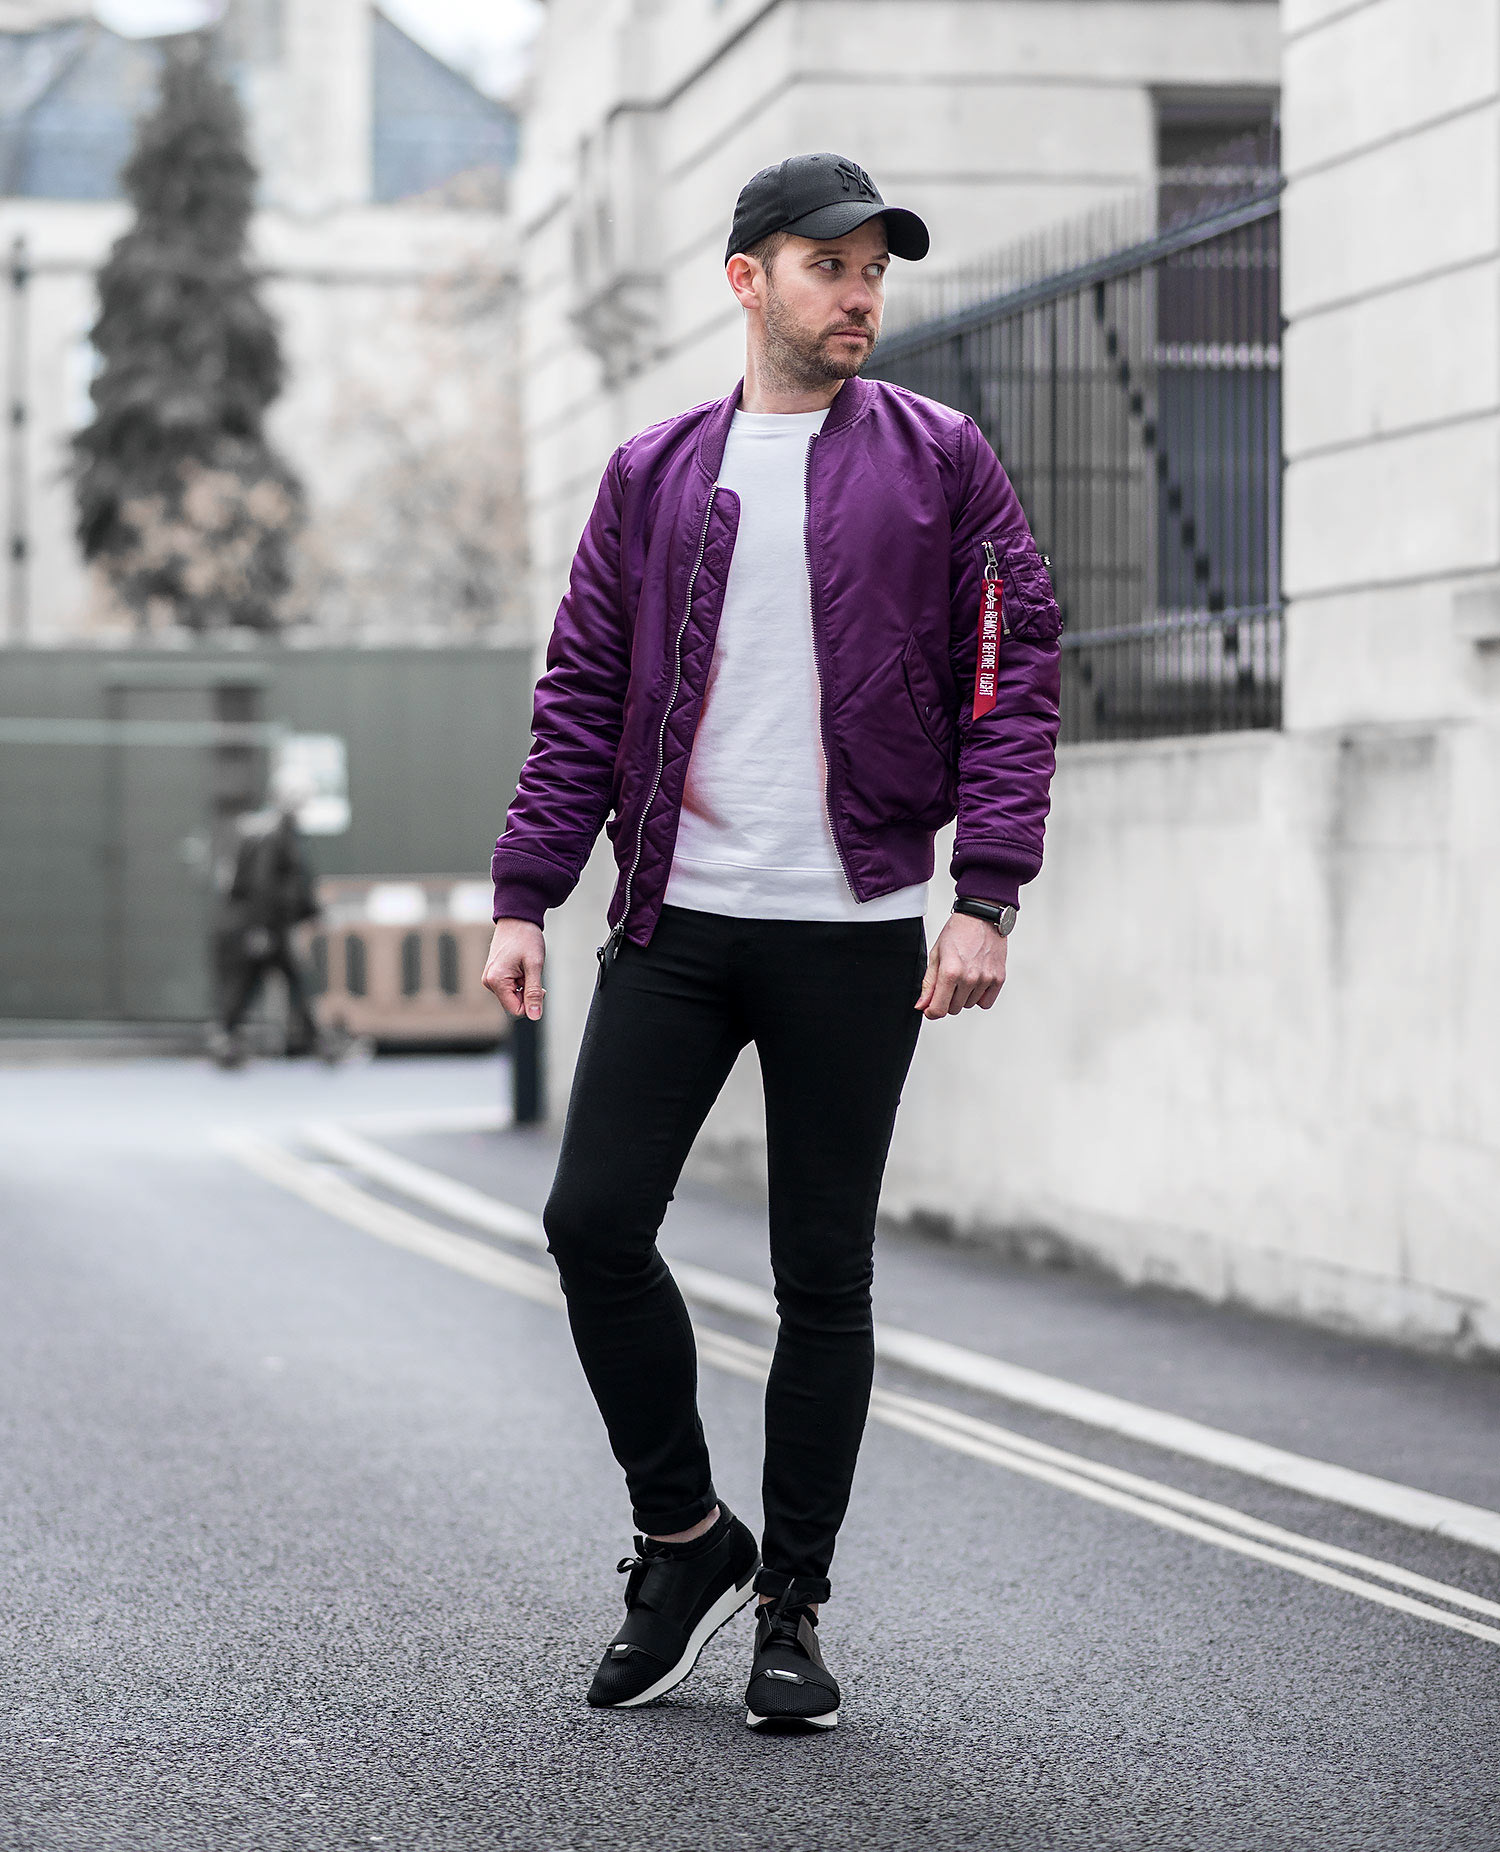 My 20 Favourite Outfits of 2017 - Your Average Guy